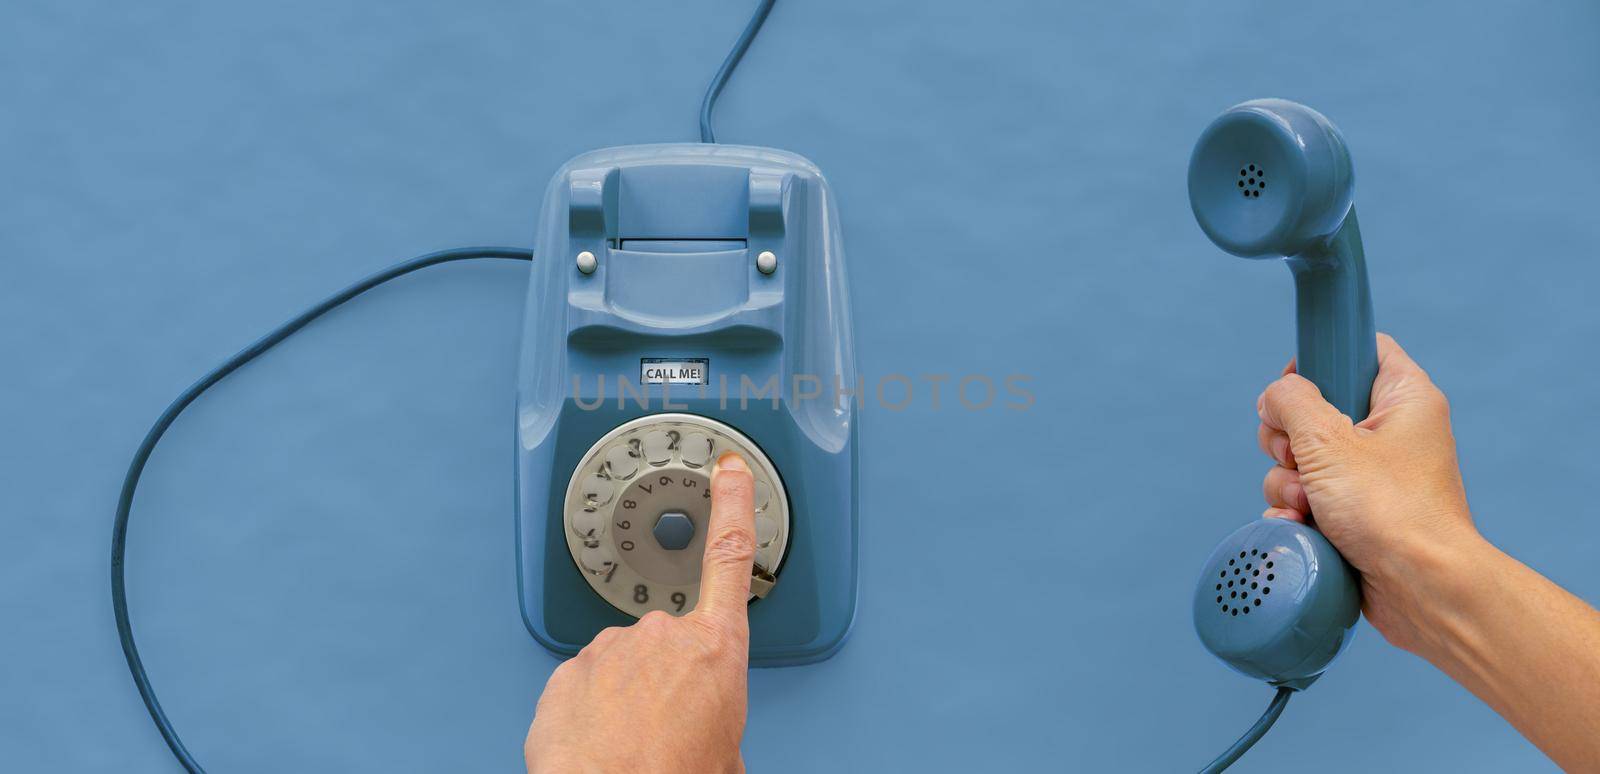 A vintage dial telephone handset with one hand and background.  by maramade